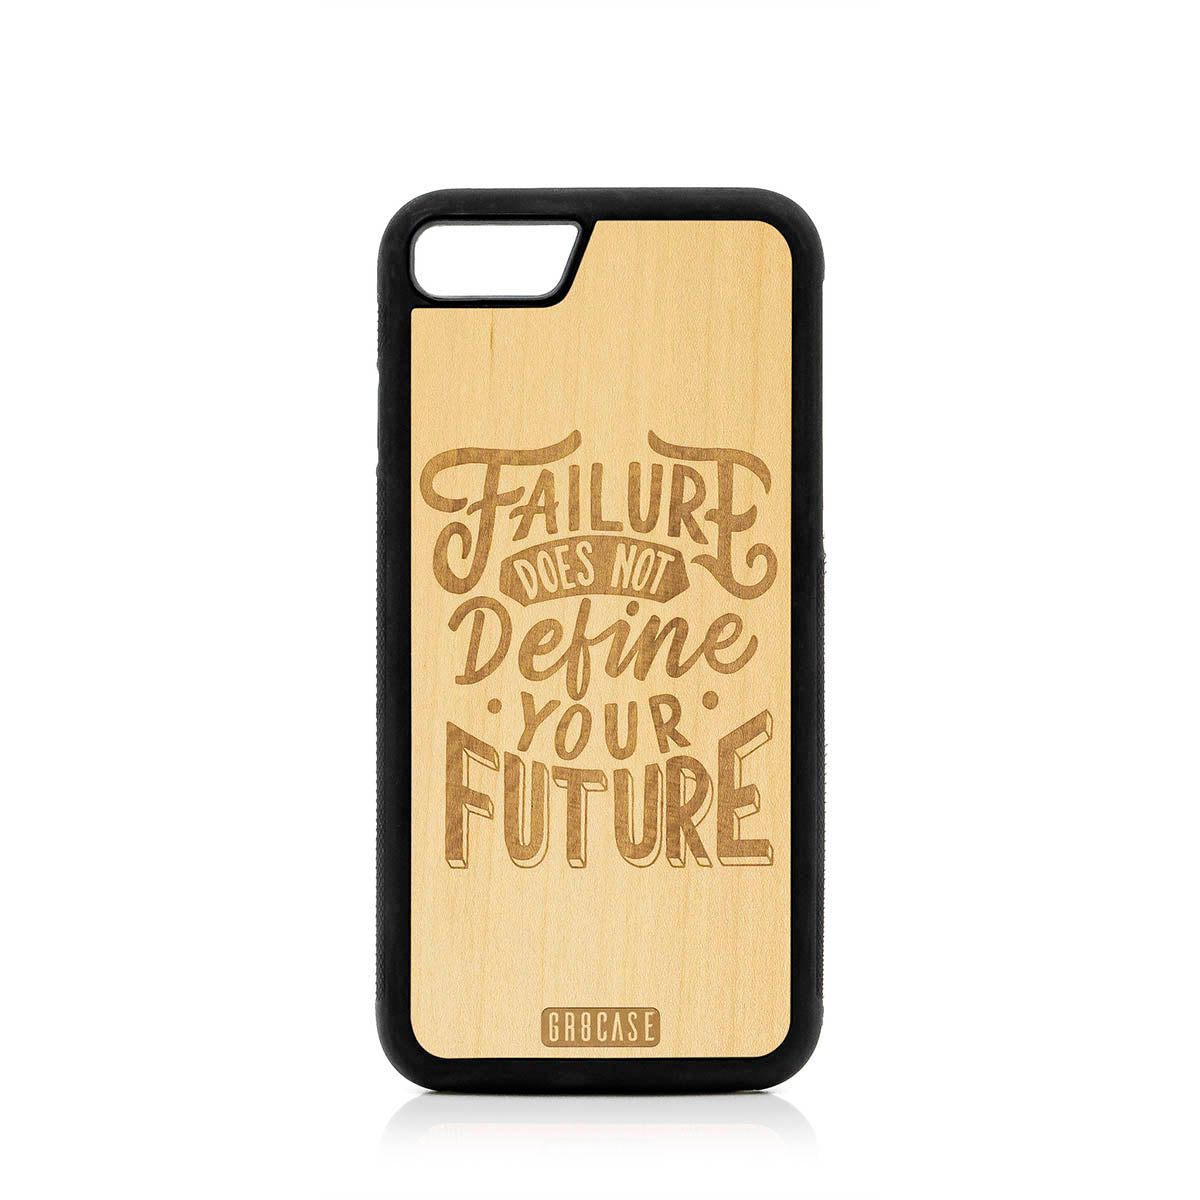 Failure Does Not Define You Future Design Wood Case For iPhone 7/8 by GR8CASE